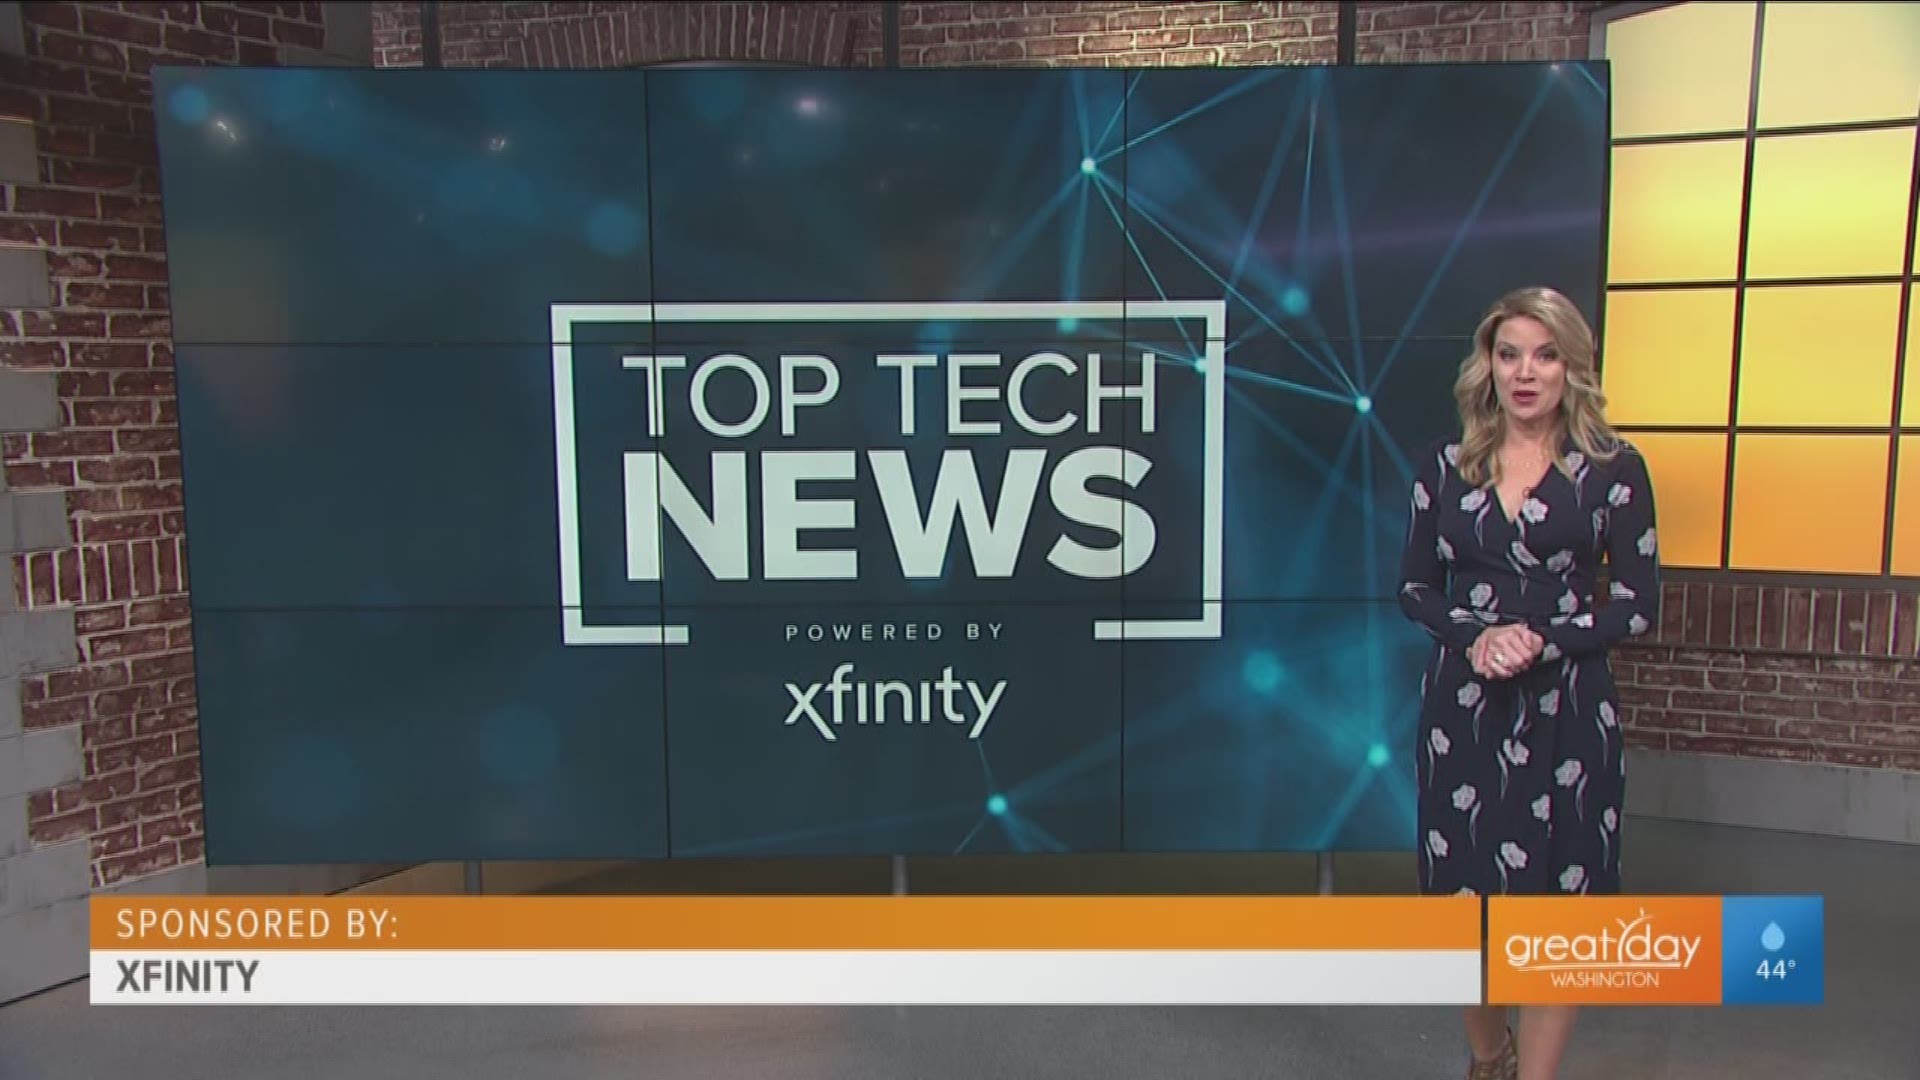 Kristen brings you the top tech news for the week of December 11, 2019.  For entertainment designed just for you, call 1-800-Xfinity. Sponsored by Xfinity.